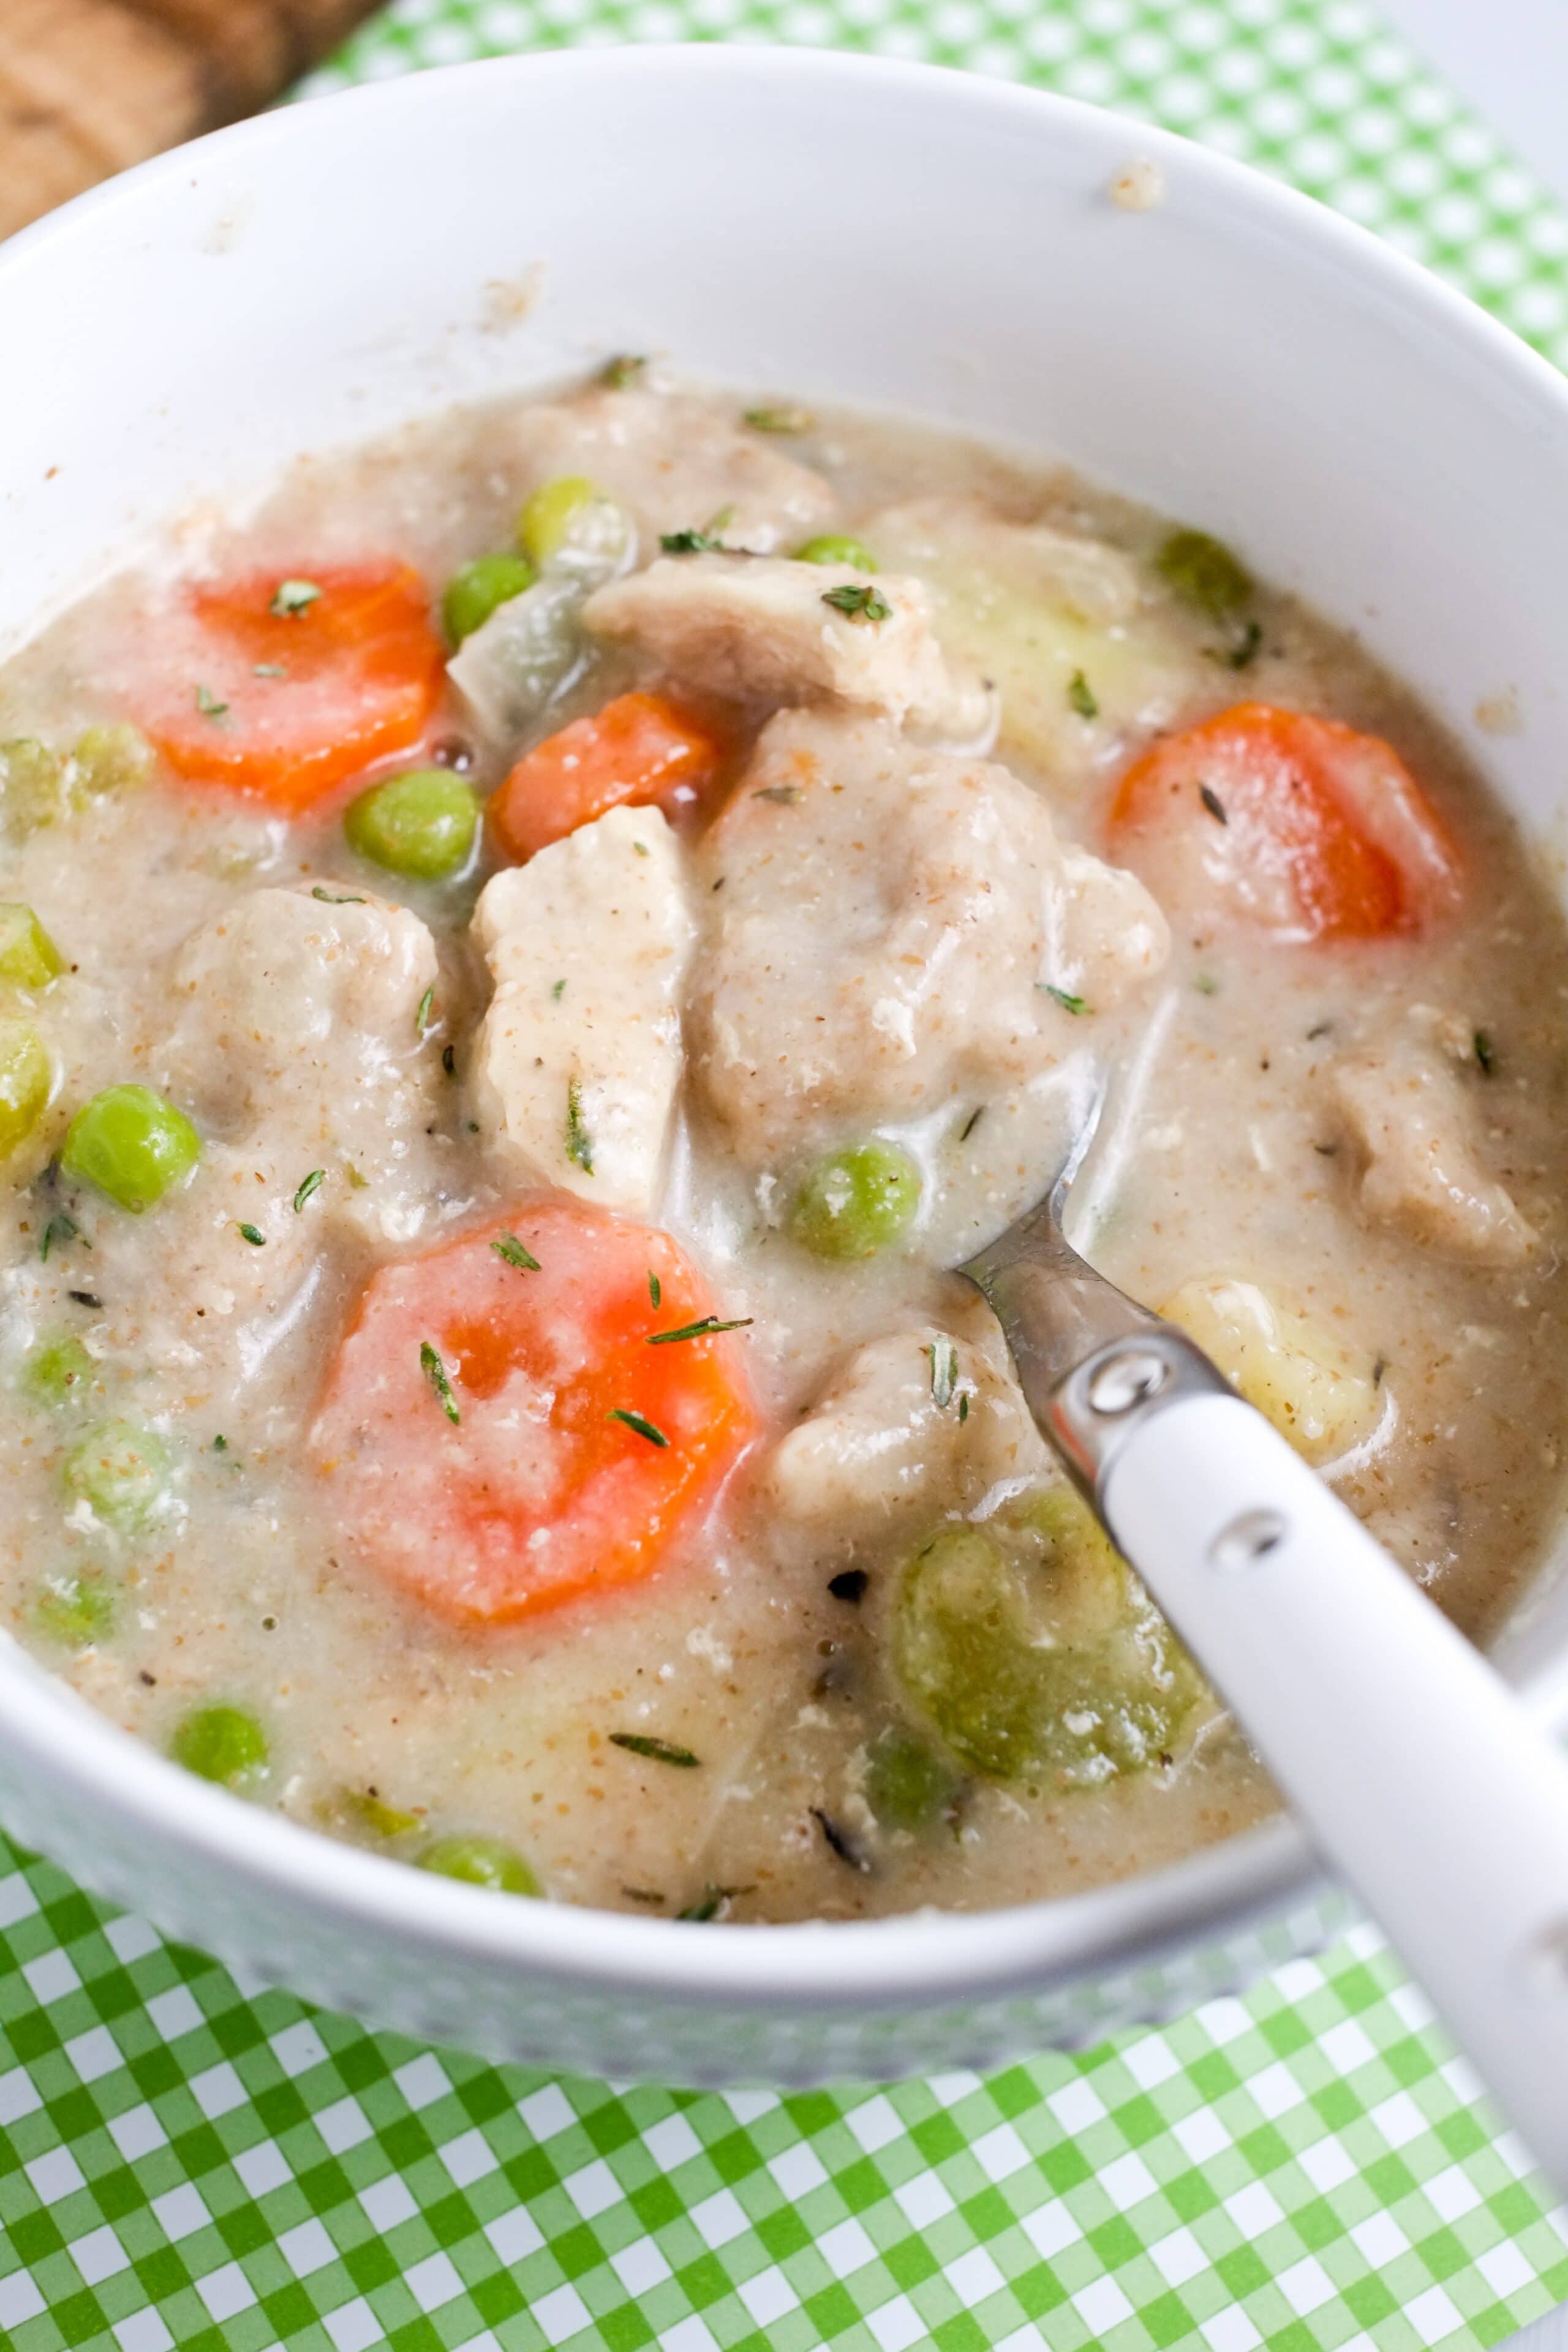 Chicken and Dumplings - Nourish and Fete